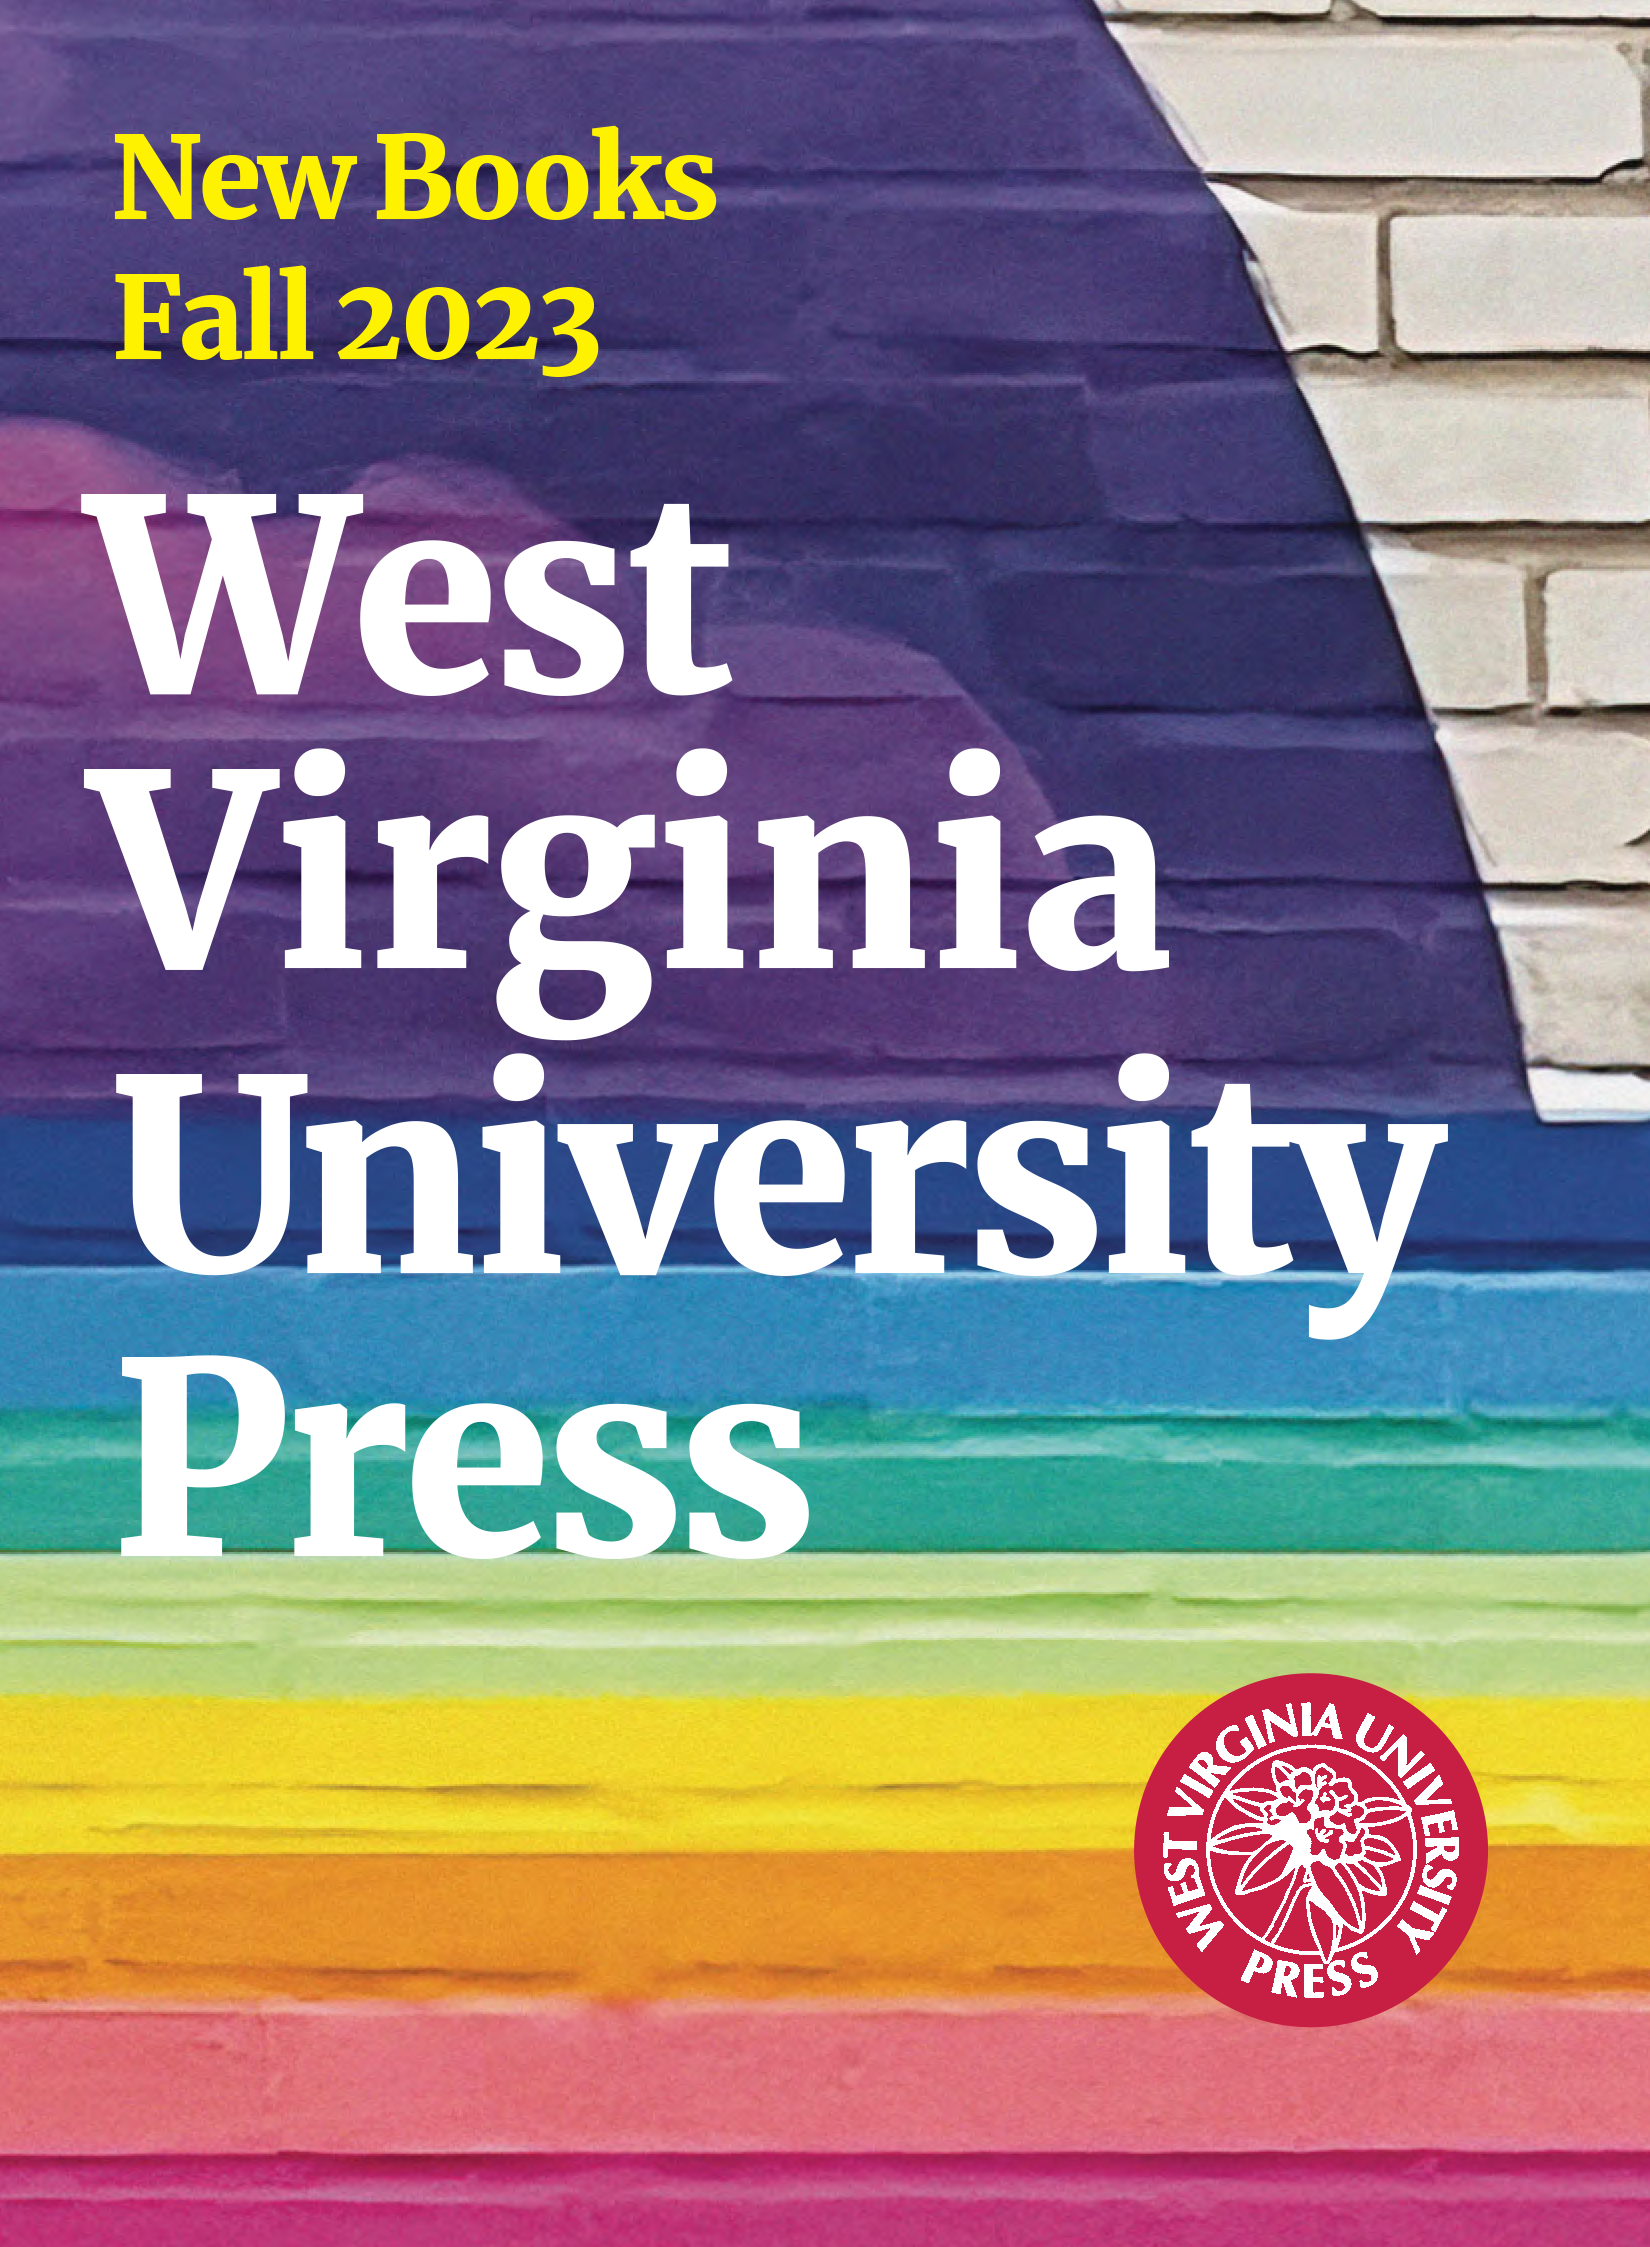 dark purple arc with a lighter purple cloud inside with rainbow colors beneath, text in yellow and white with a red WVU Press logo